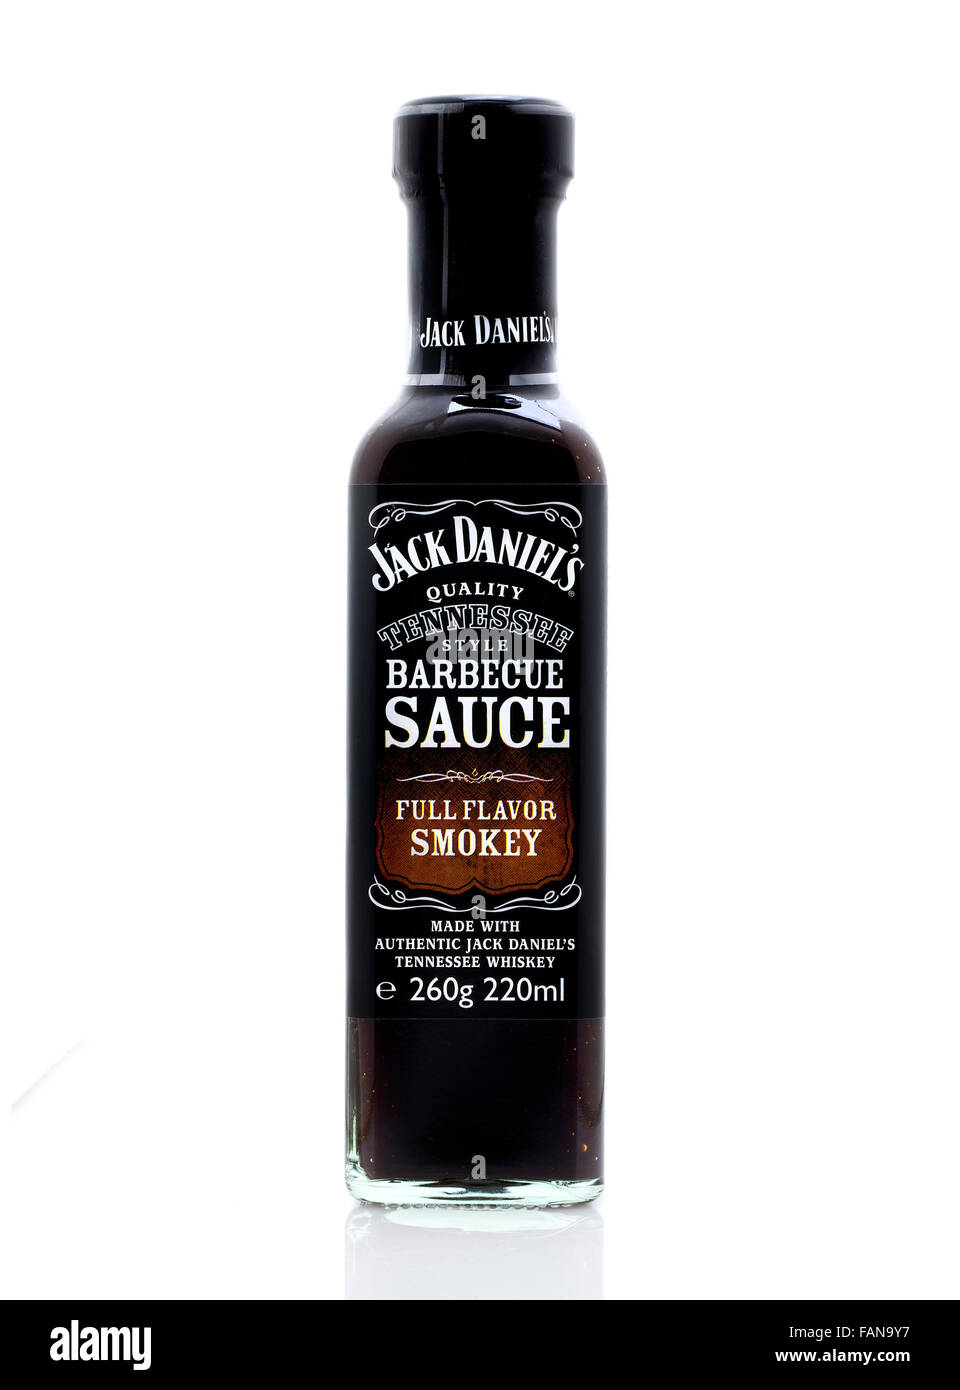 Jack Daniels Tennessee Full Flavor Barbecue Sauce on a white background Stock Photo